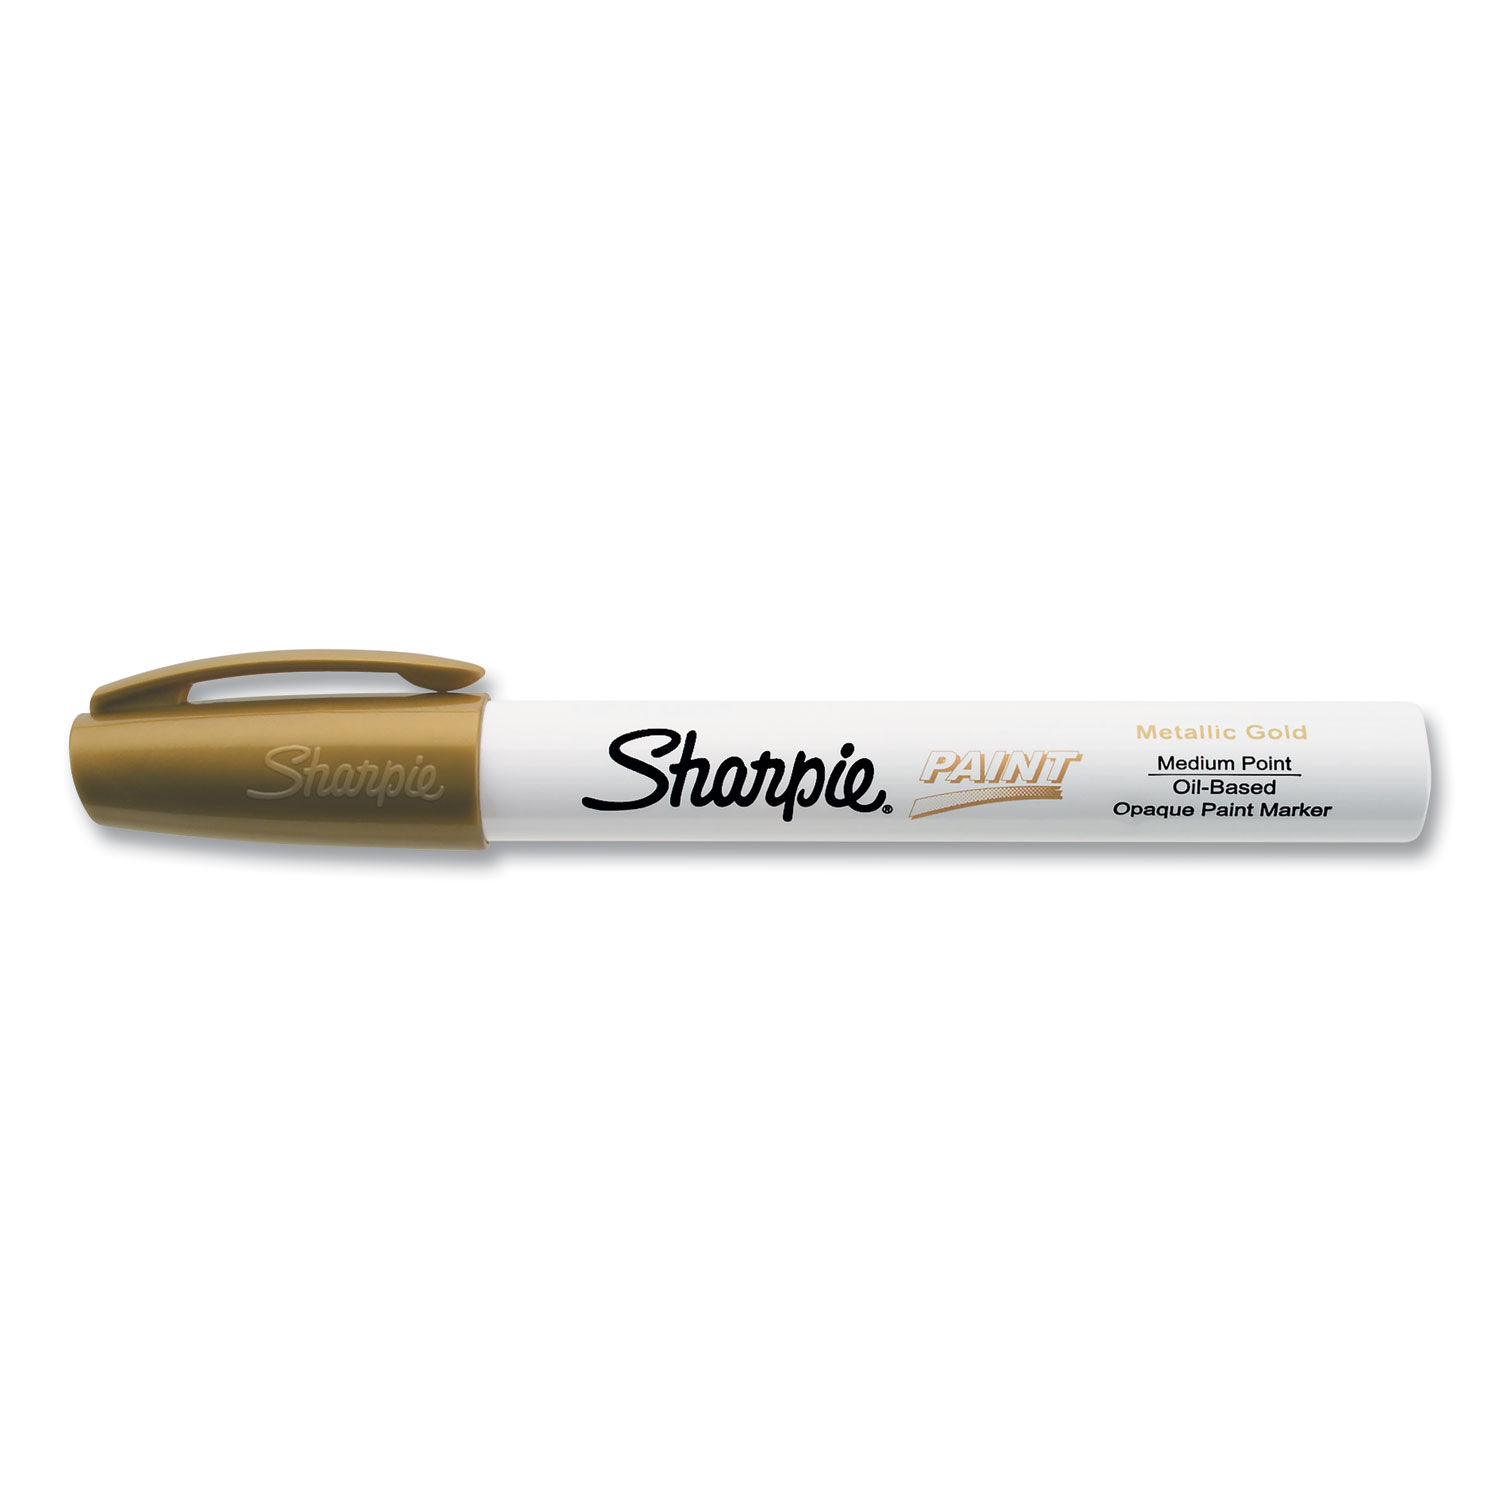 Reviews for Sharpie Gold and Silver Medium Point Oil-Based Paint Marker  (2-Pack)